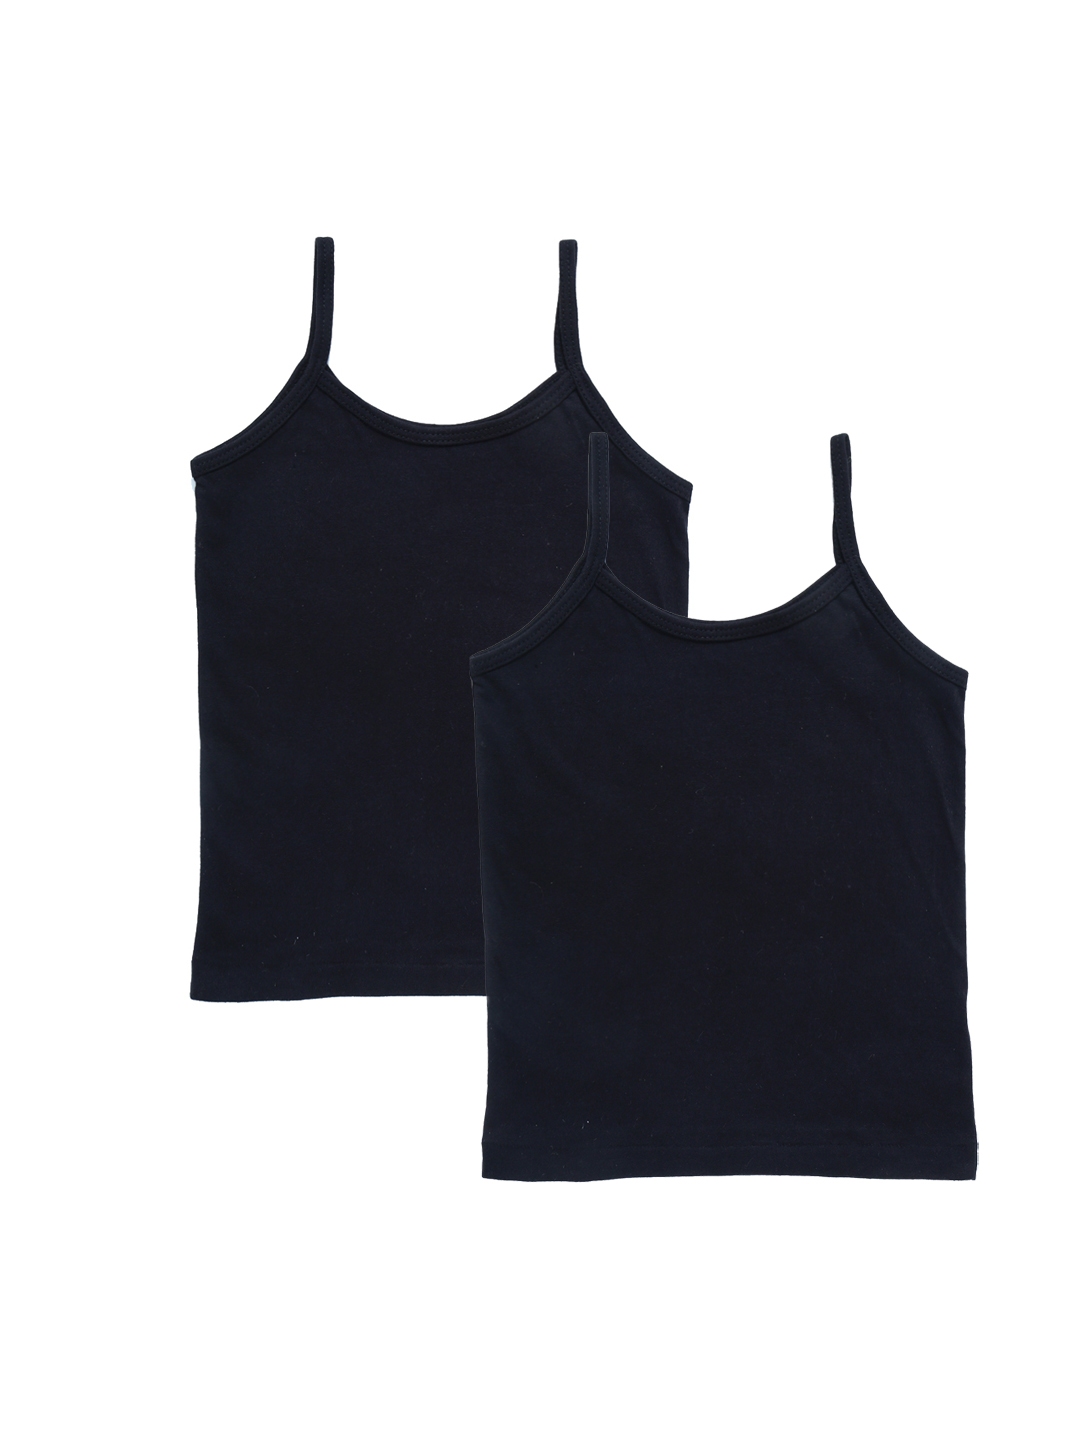 Buy YK Girls Pack Of 2 Black Solid Spaghetti Vests - Camisoles for